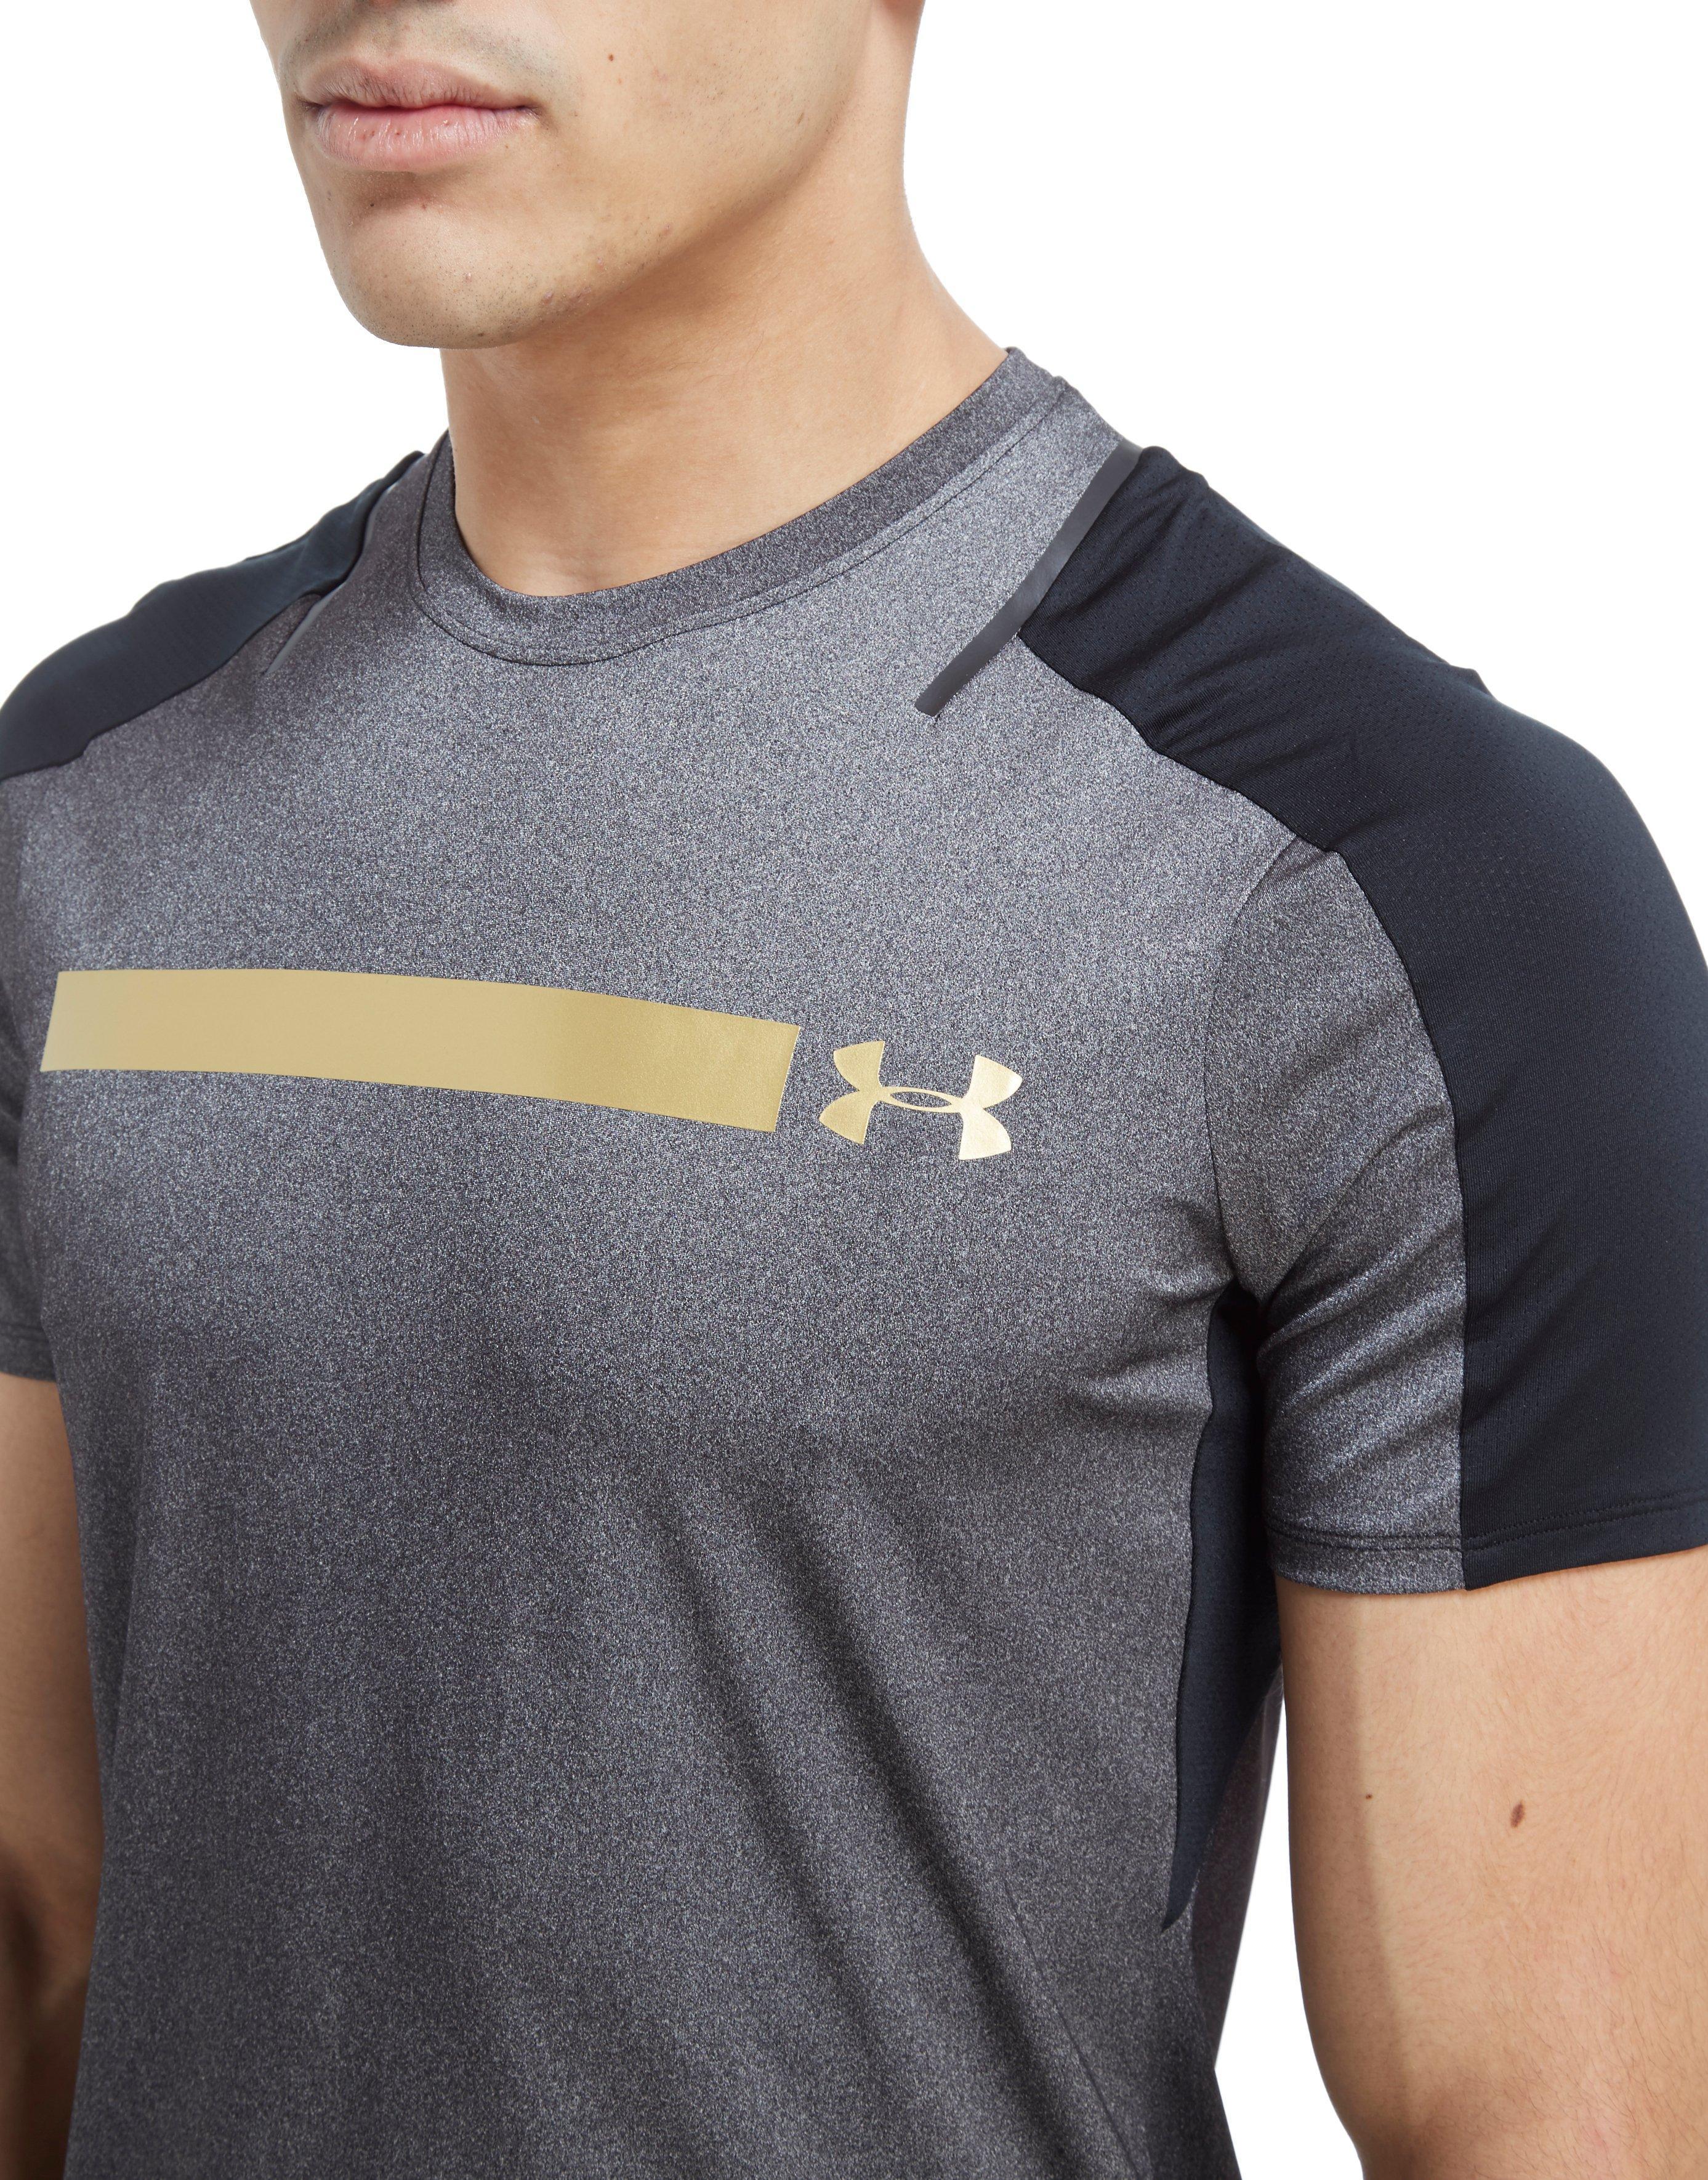 Under Armour Gold Shirt Online Collection, 61% OFF | deliciousgreek.ca